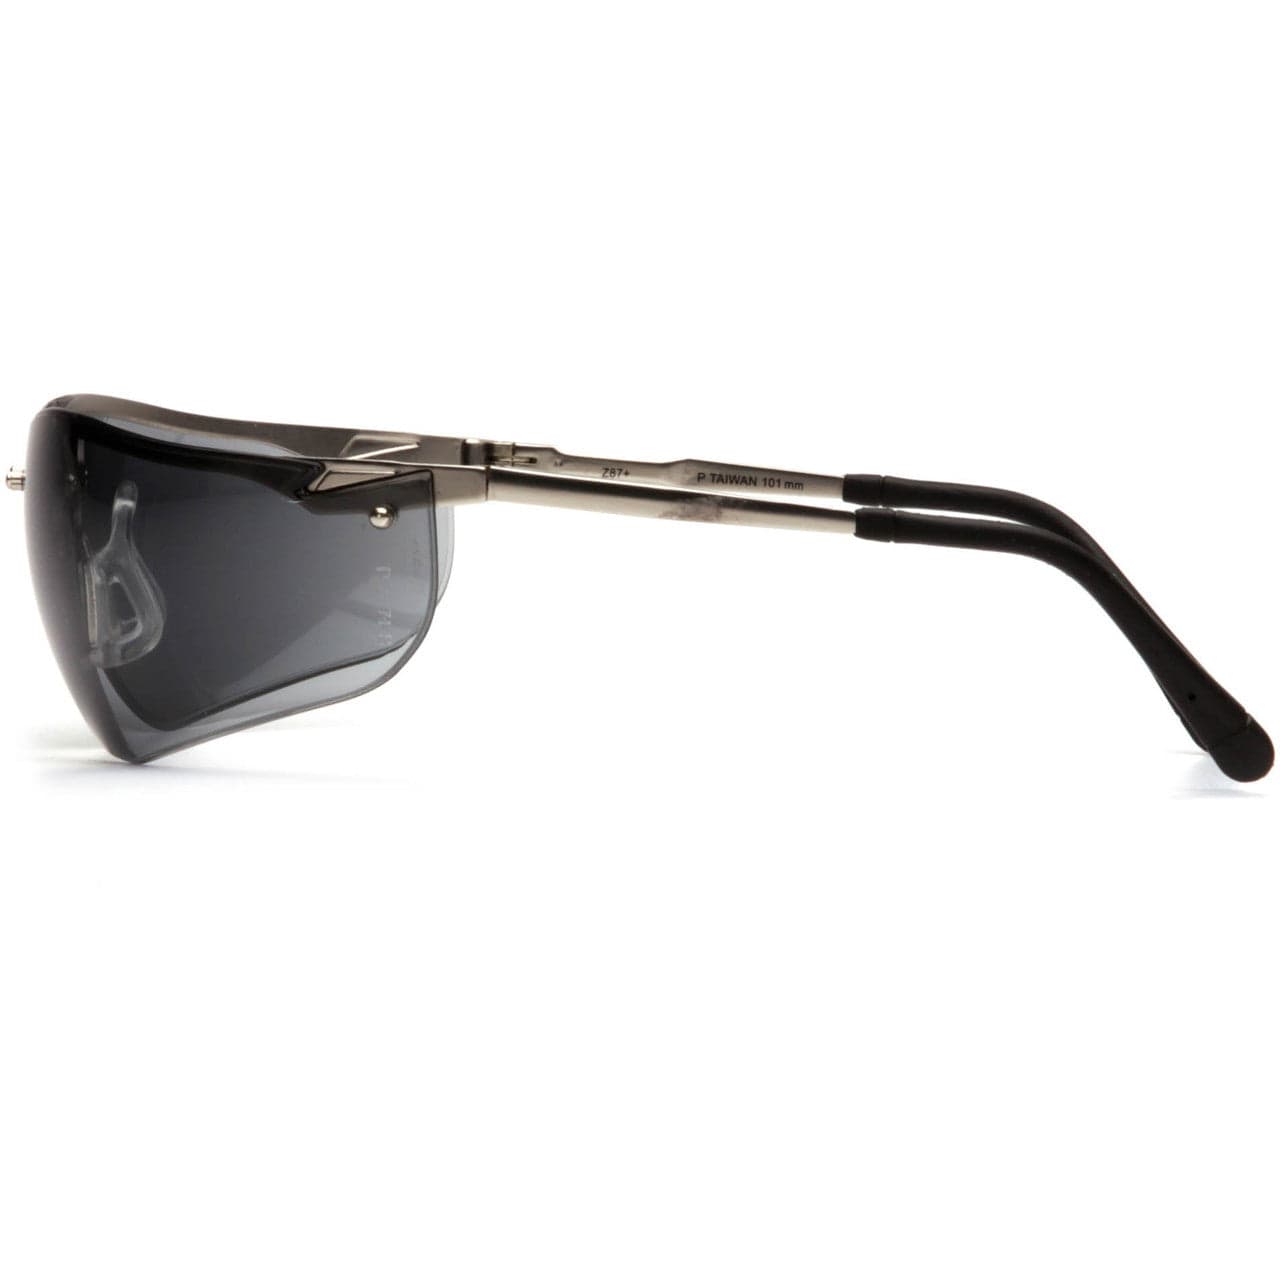 Pyramex V2 Metal Safety Glasses with Gray Lens SGM1820S Side